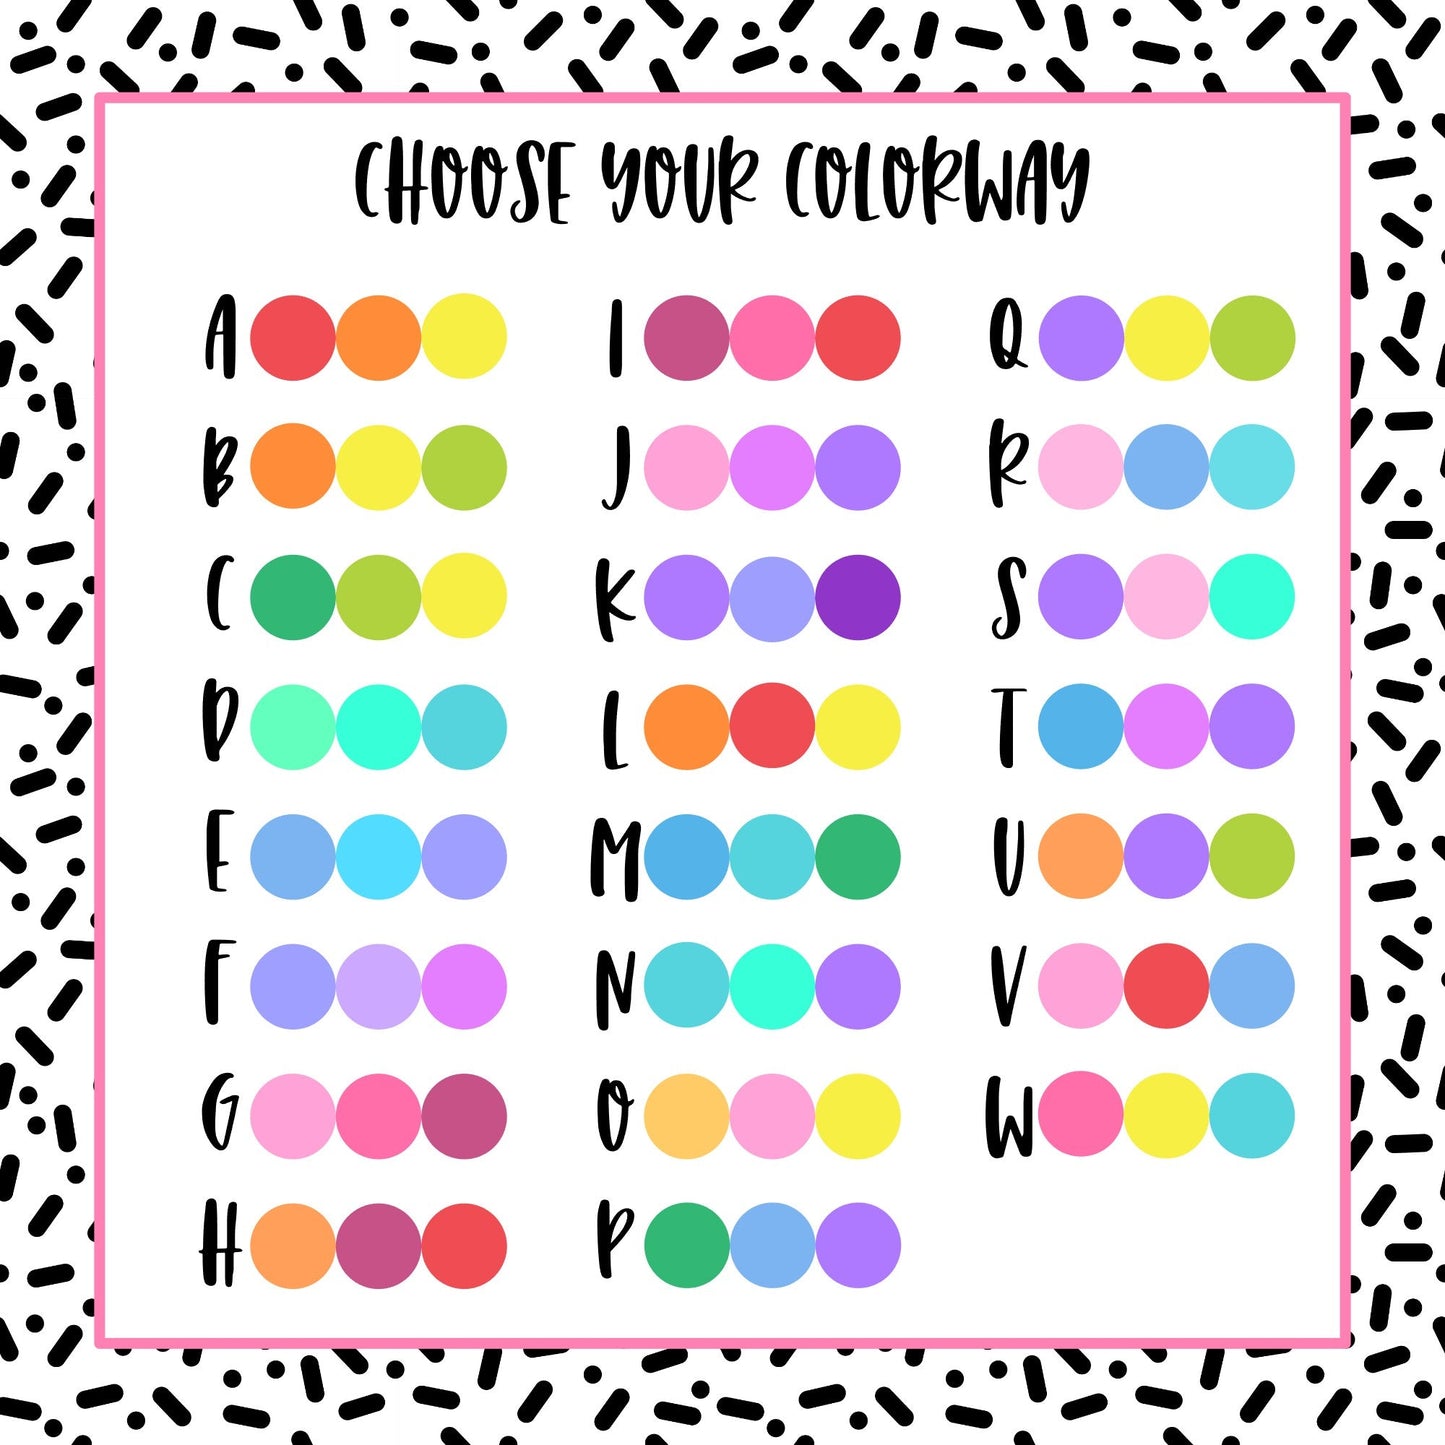 Bright Lined Notebook Boxes - 23 color options